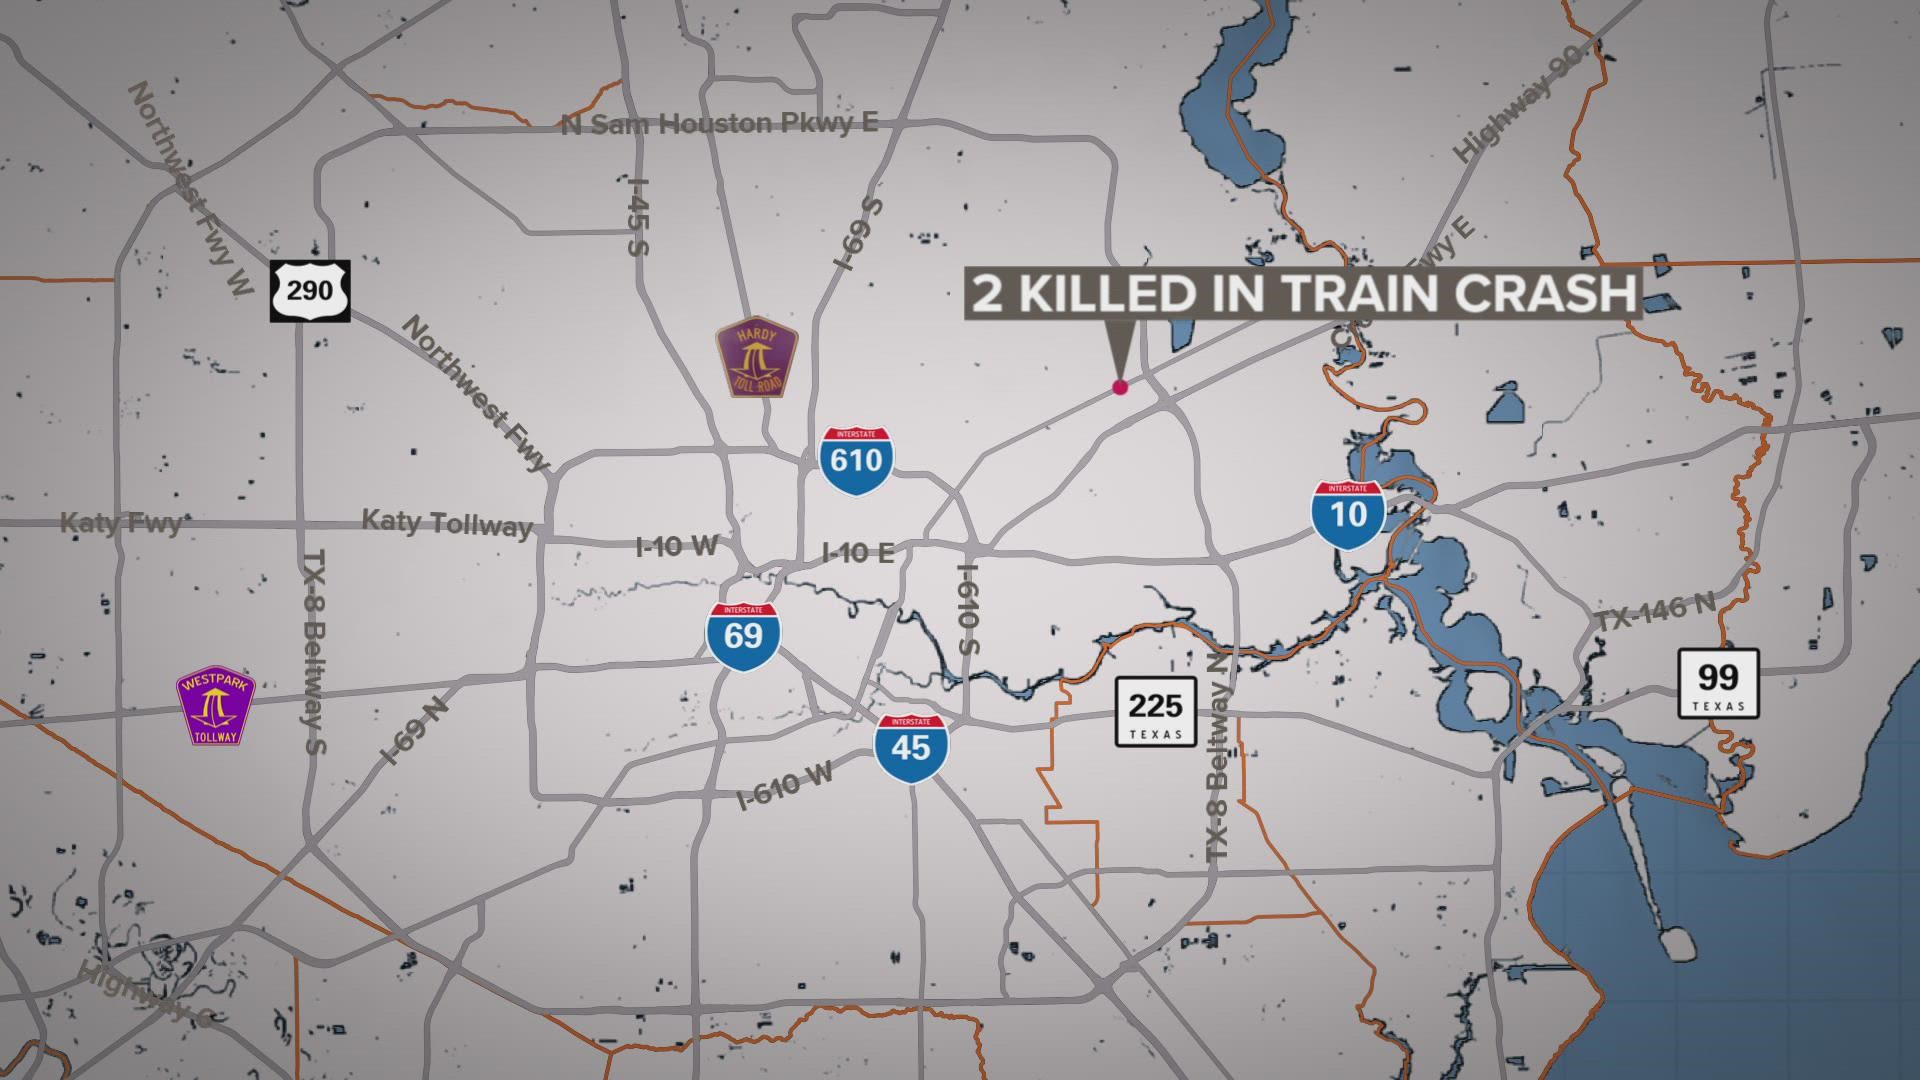 Two people are dead after an Amtrak passenger train hit a vehicle Saturday night at a crossing off of Beaumont Highway near Van Hut Lane, HCSO said.